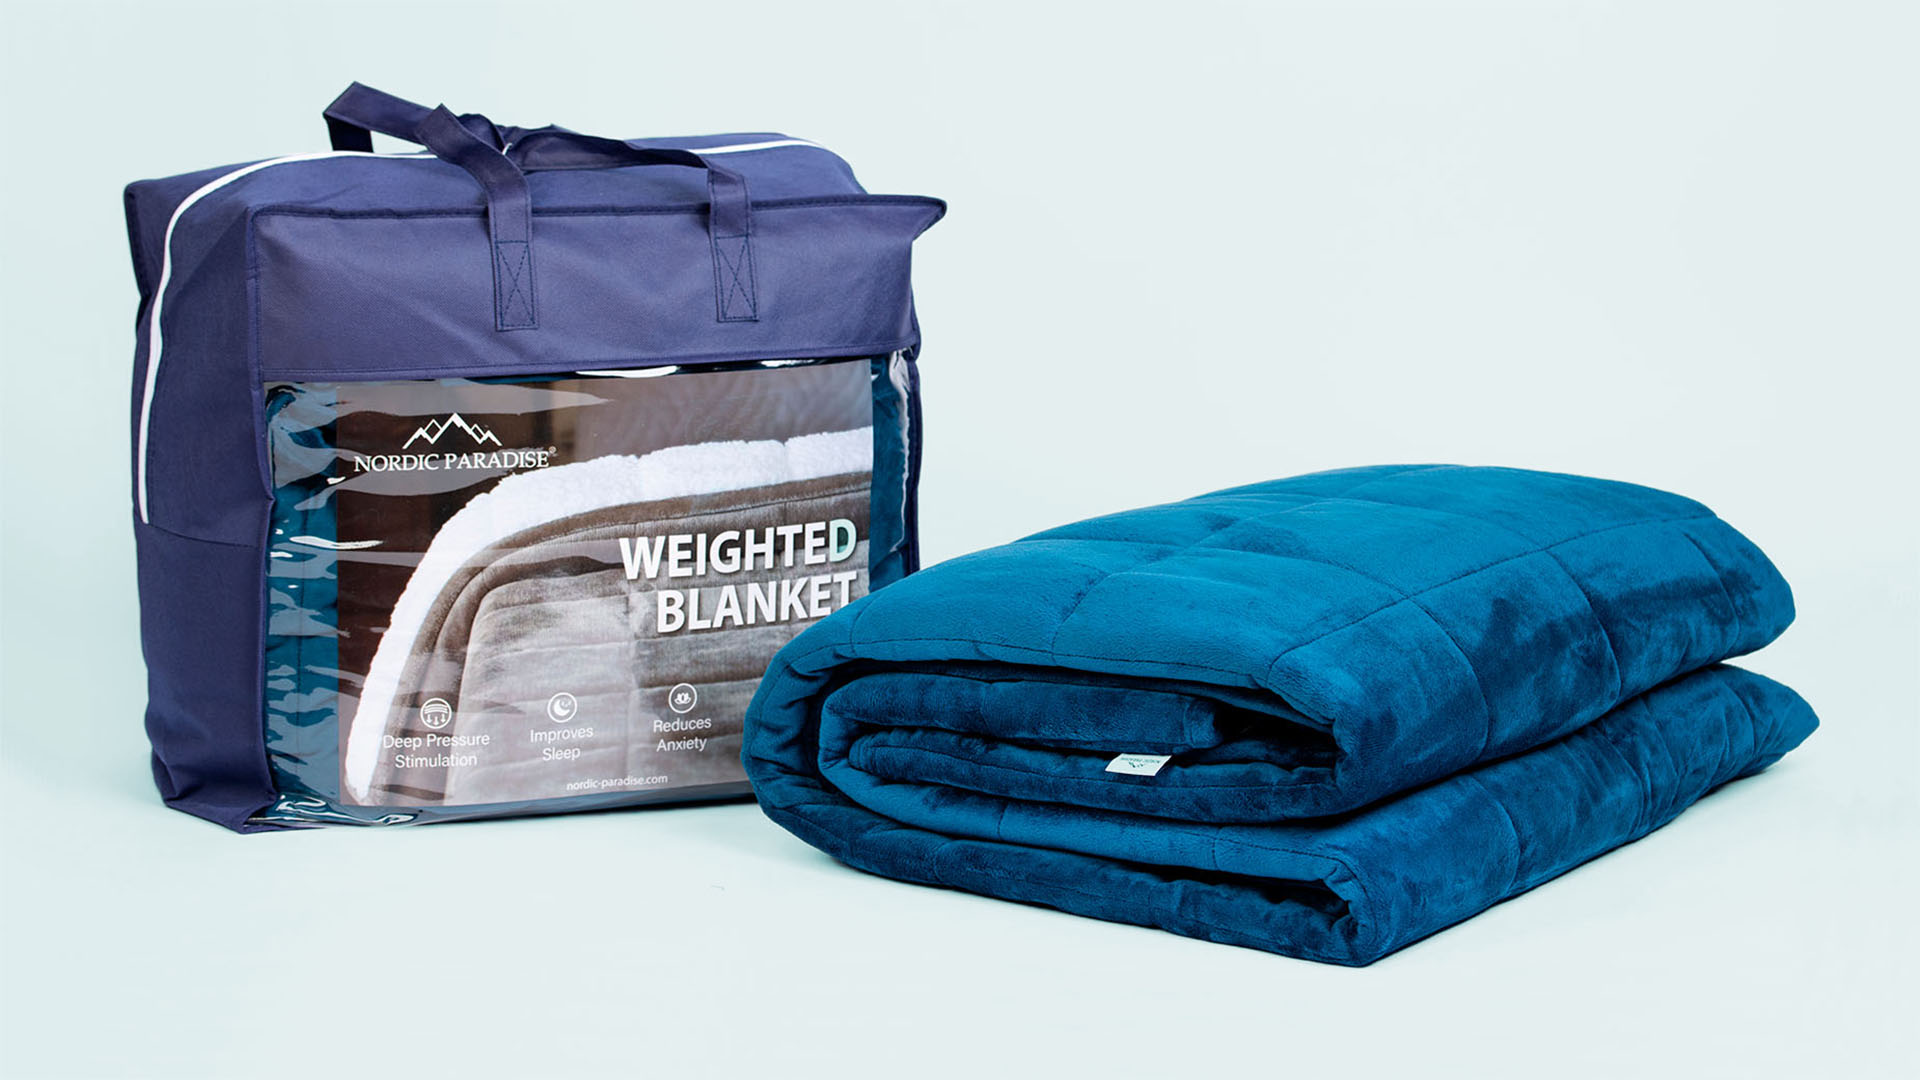 Folded blue weighted blanket and a packaging on light blue background